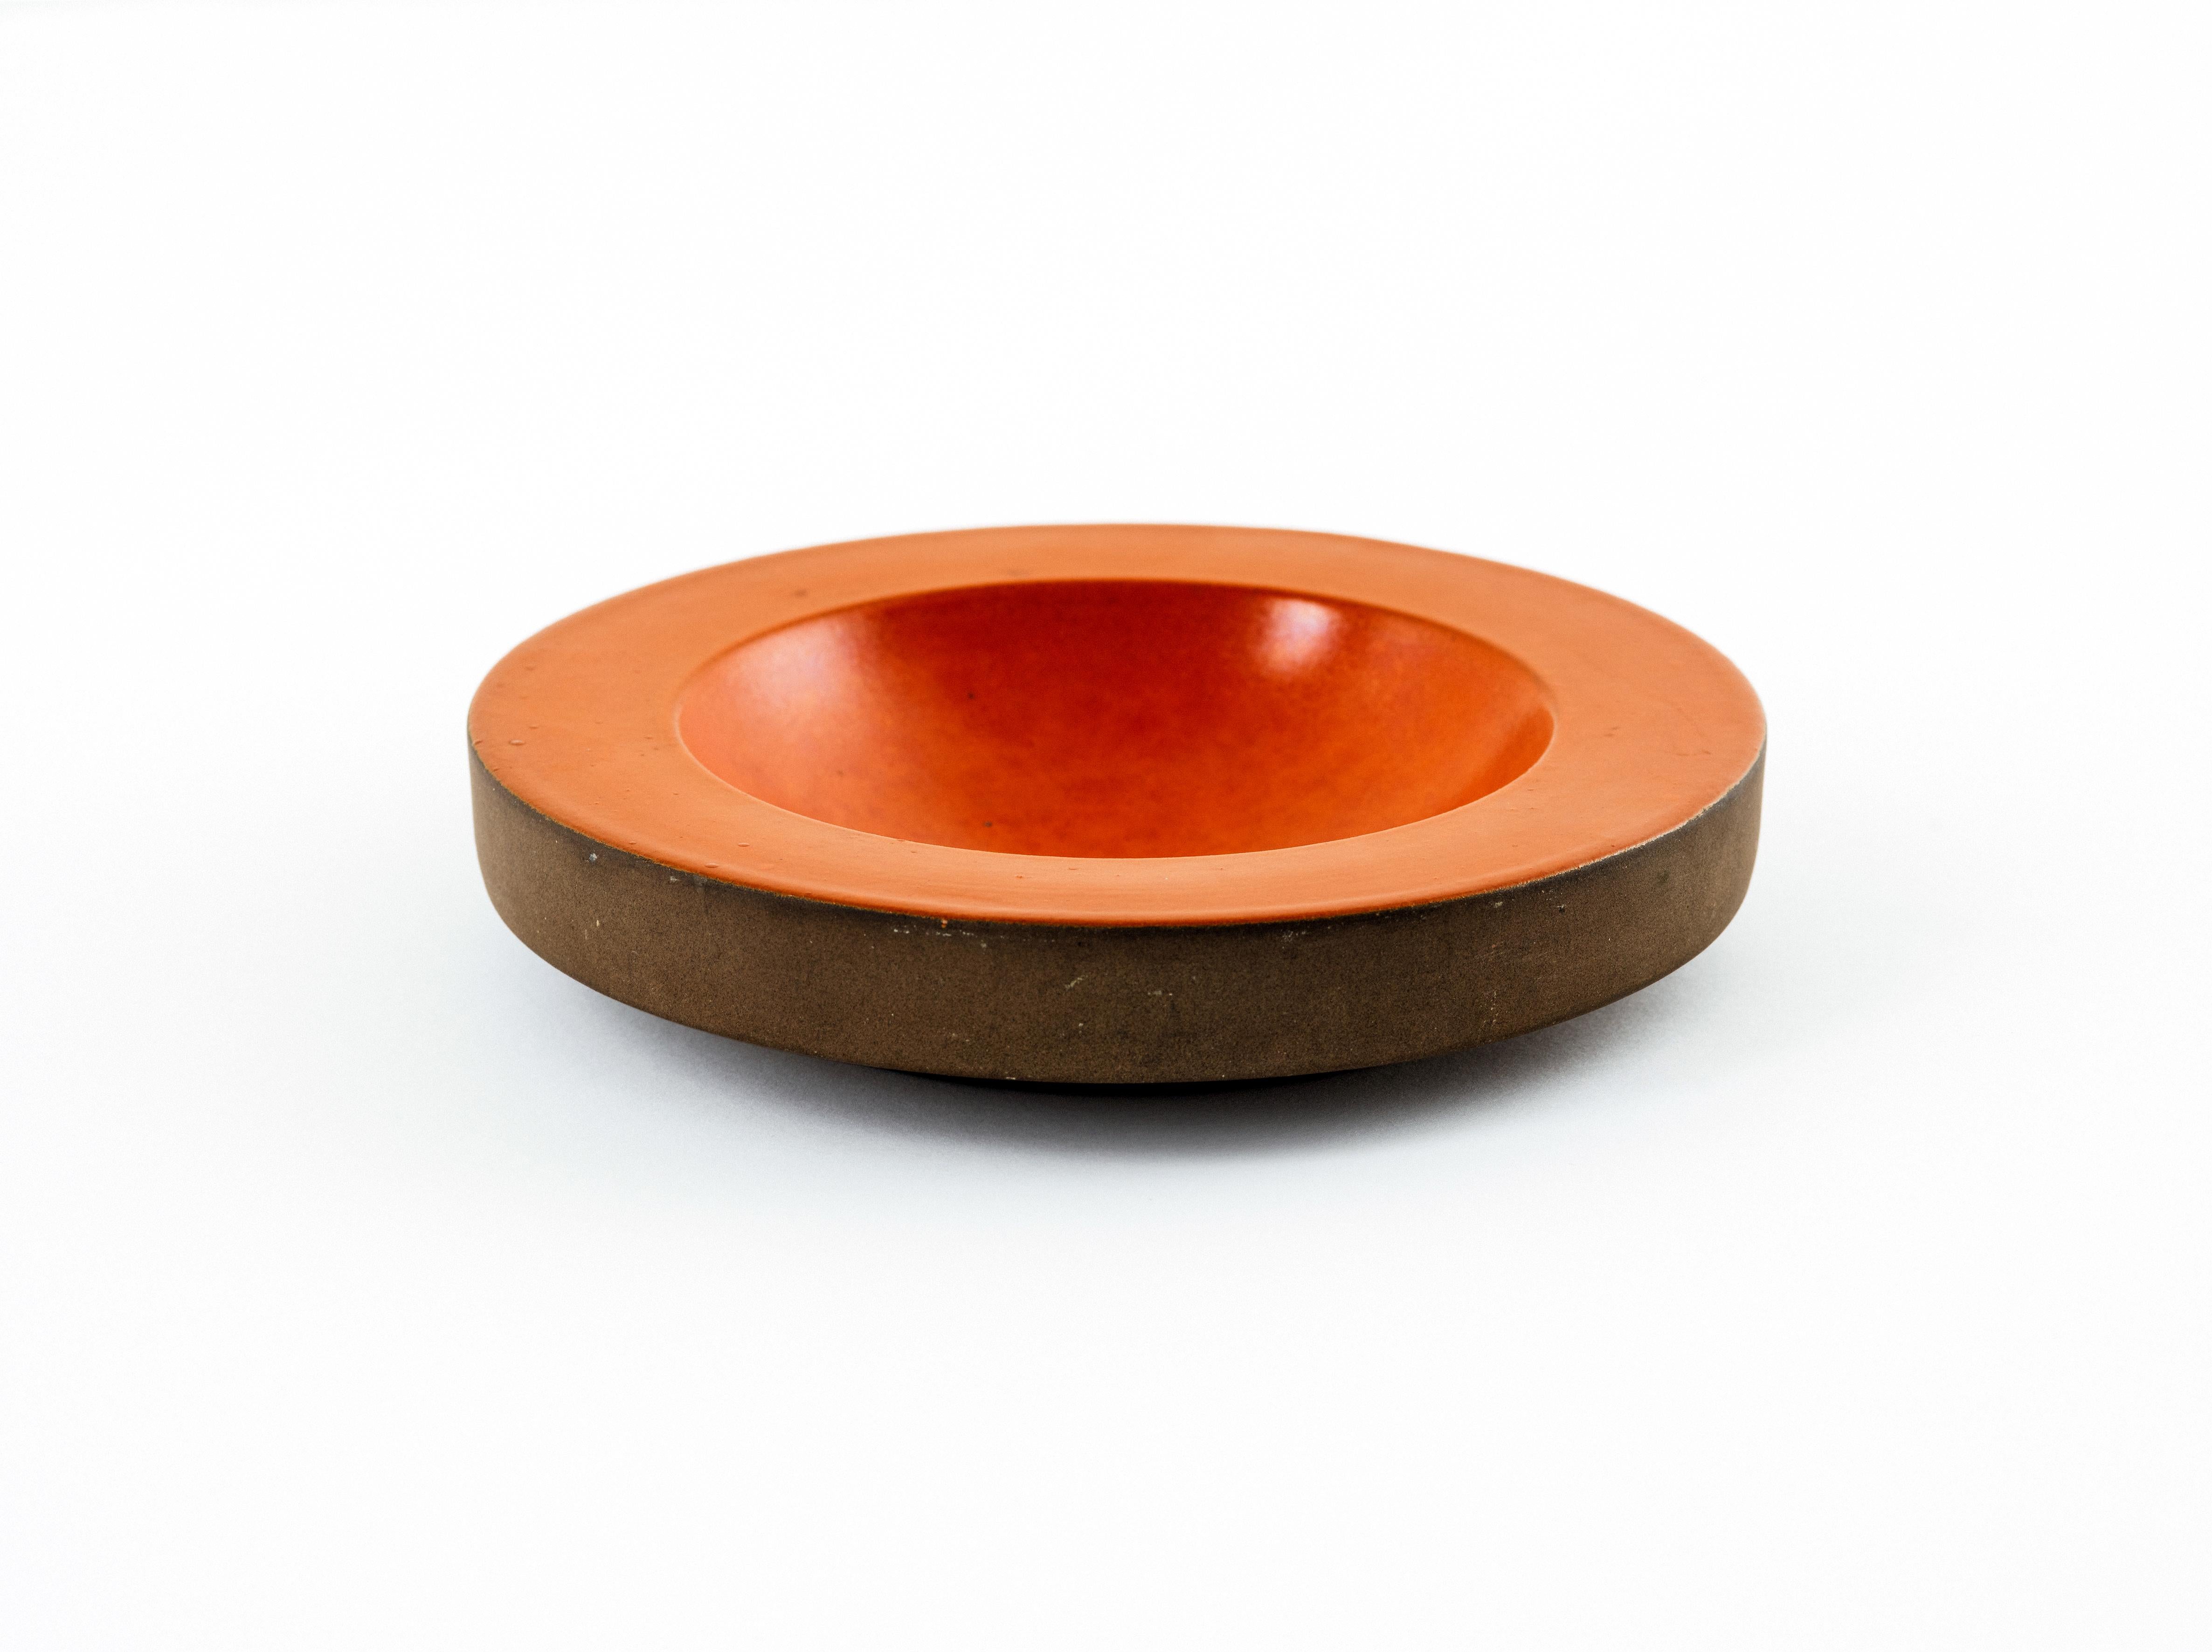 Modernist vide poche (catchall) or low bowl in slip-cast ceramic with a satin, blood orange glaze to the interior and rim, its edge and underside left unfinished for a striking contrast in color, sheen, and texture. The body floats over a recessed